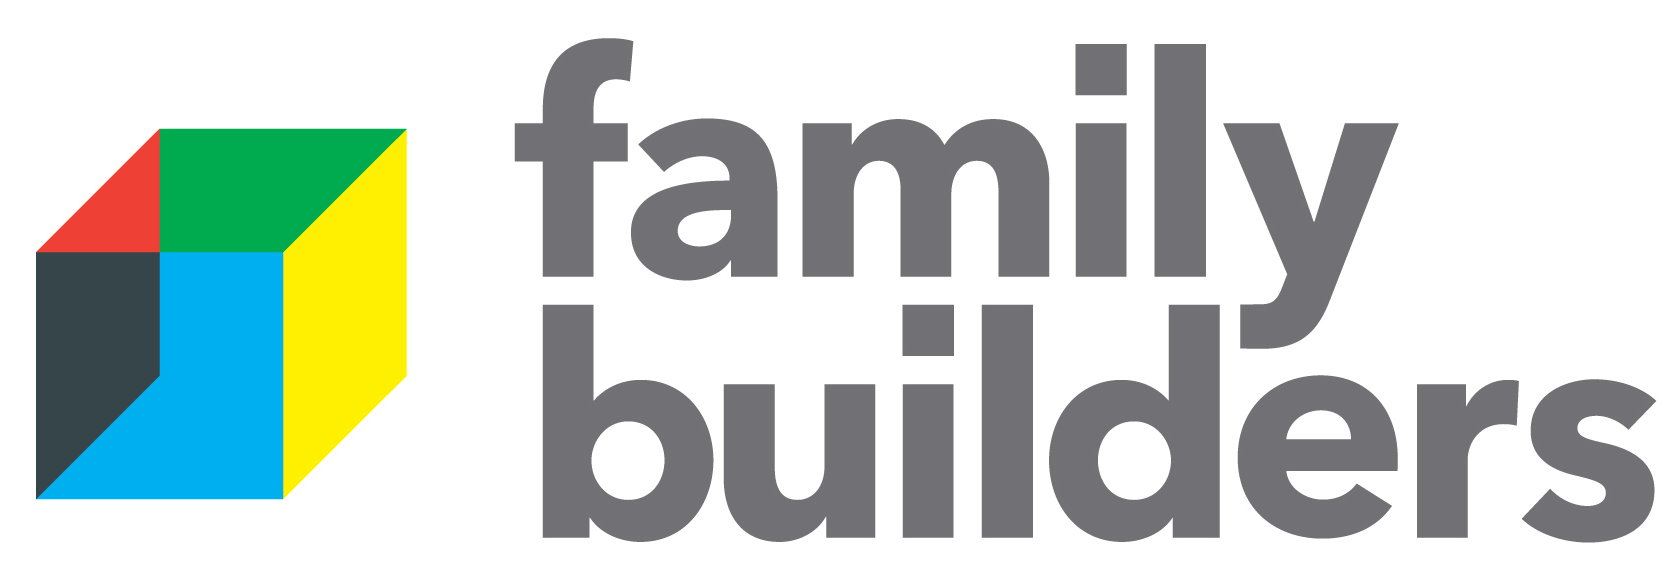 Family Builders OKC is a client of Chris Zervas, an employee engagement and retention keynote speaker in Oklahoma